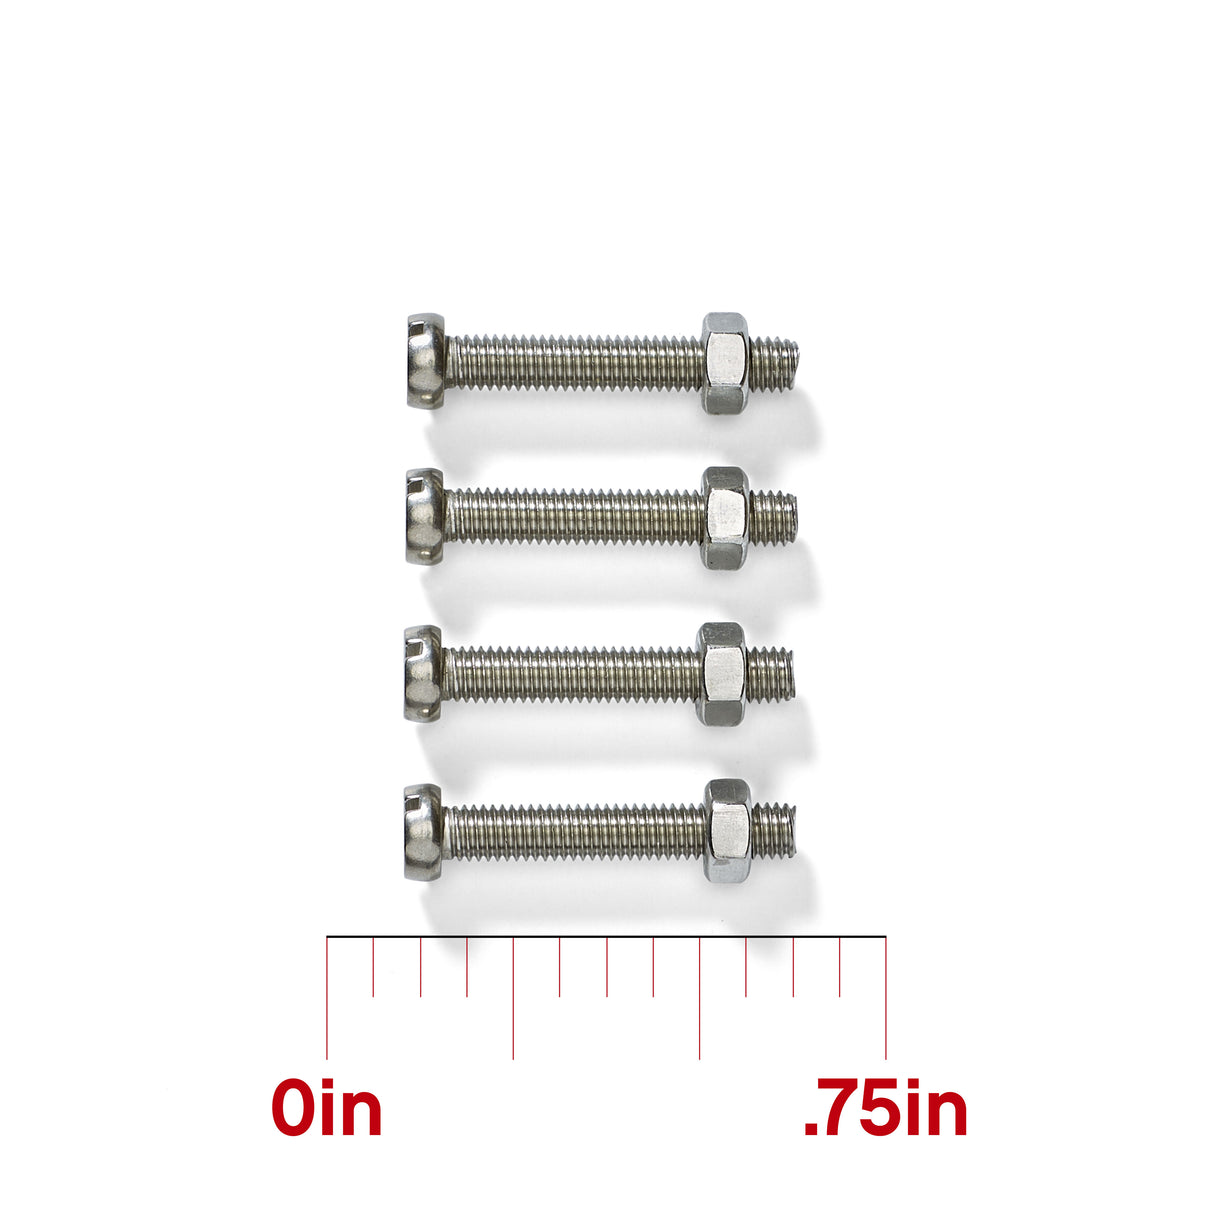 Long Bolts and Nuts for Fender Holder Rail Mounts TFR-402 (4-pack)